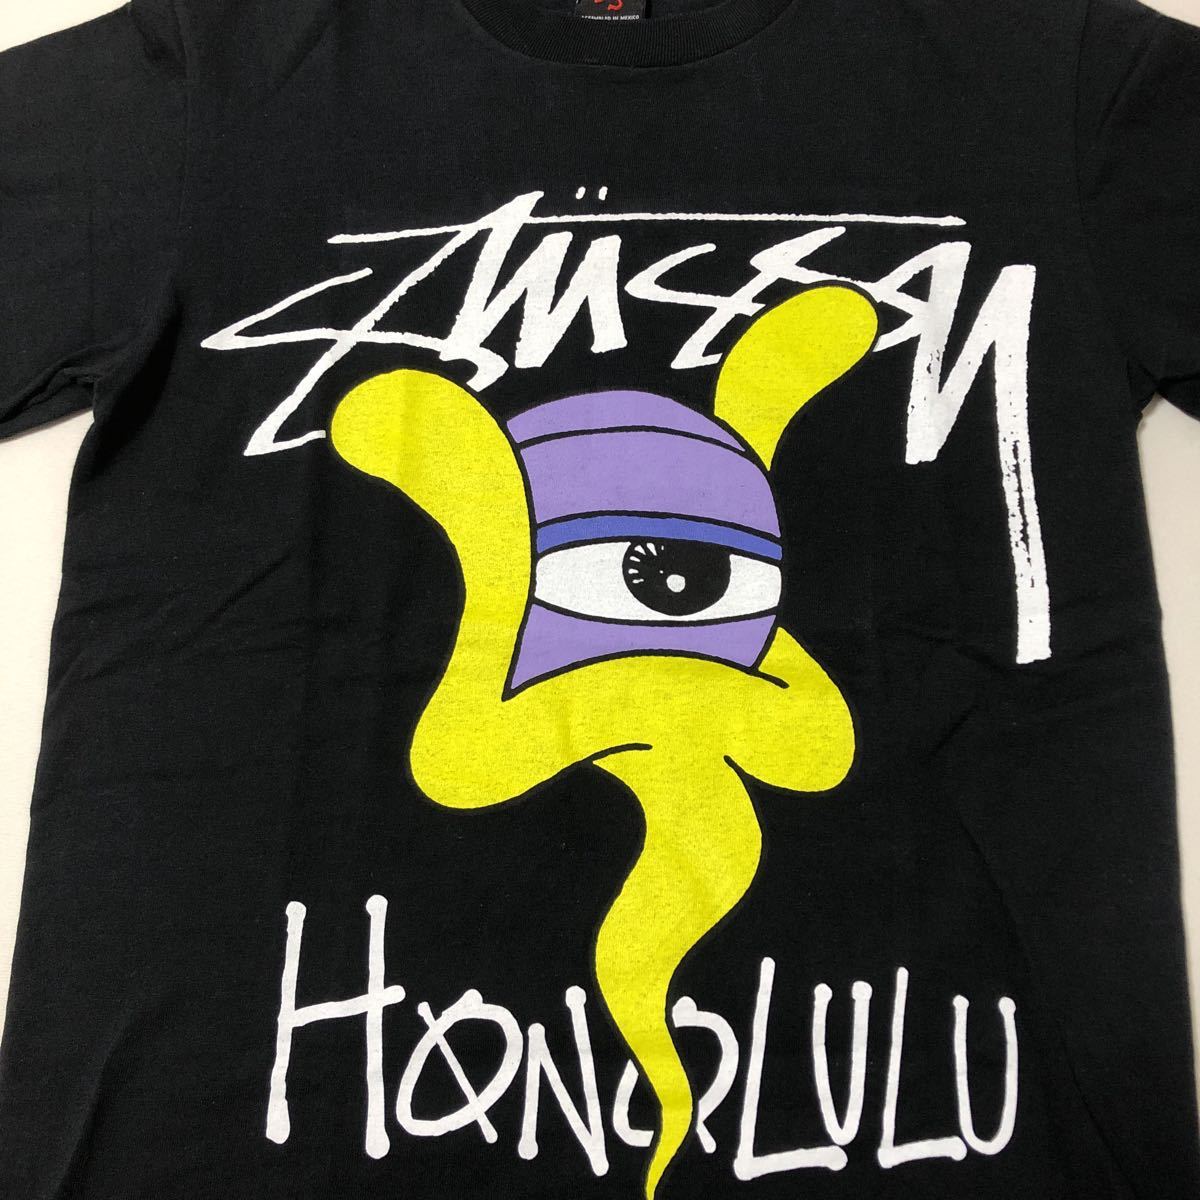 STUSSY x GHOST HONOLULU Tシャツ ( ステューシー レア old チャプト 周年 記念 限定 総柄 フォト レア Tee )_画像2